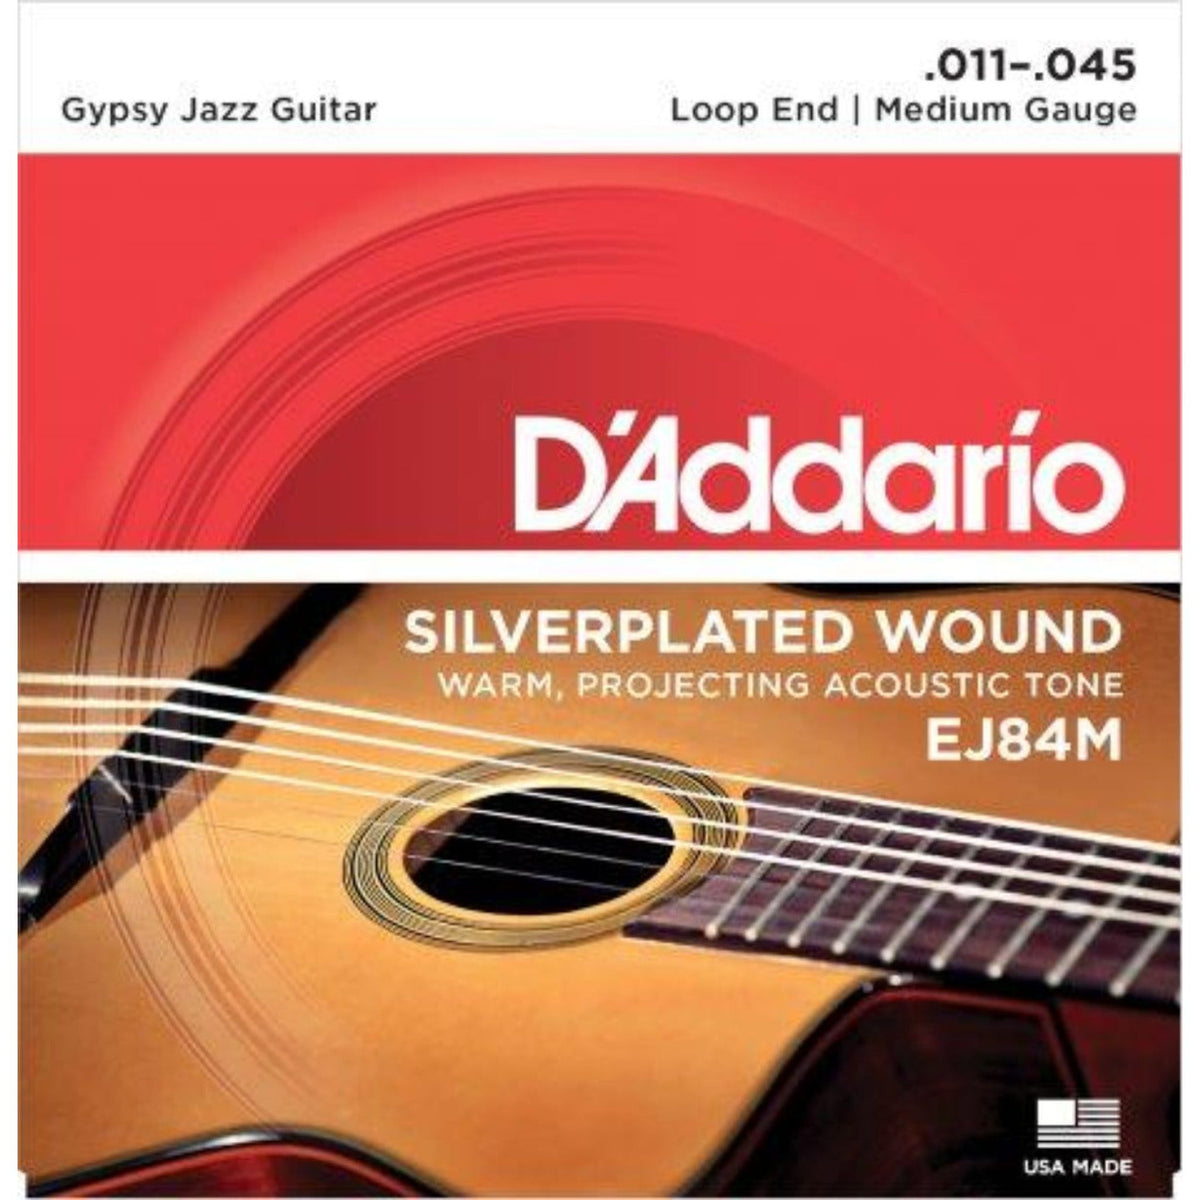 EJ84M loop end gypsy jazz acoustic guitar strings are designed and gauged for rhythm and strumming patterns associated with &quot;Django&quot;, jazz-style guitar. 